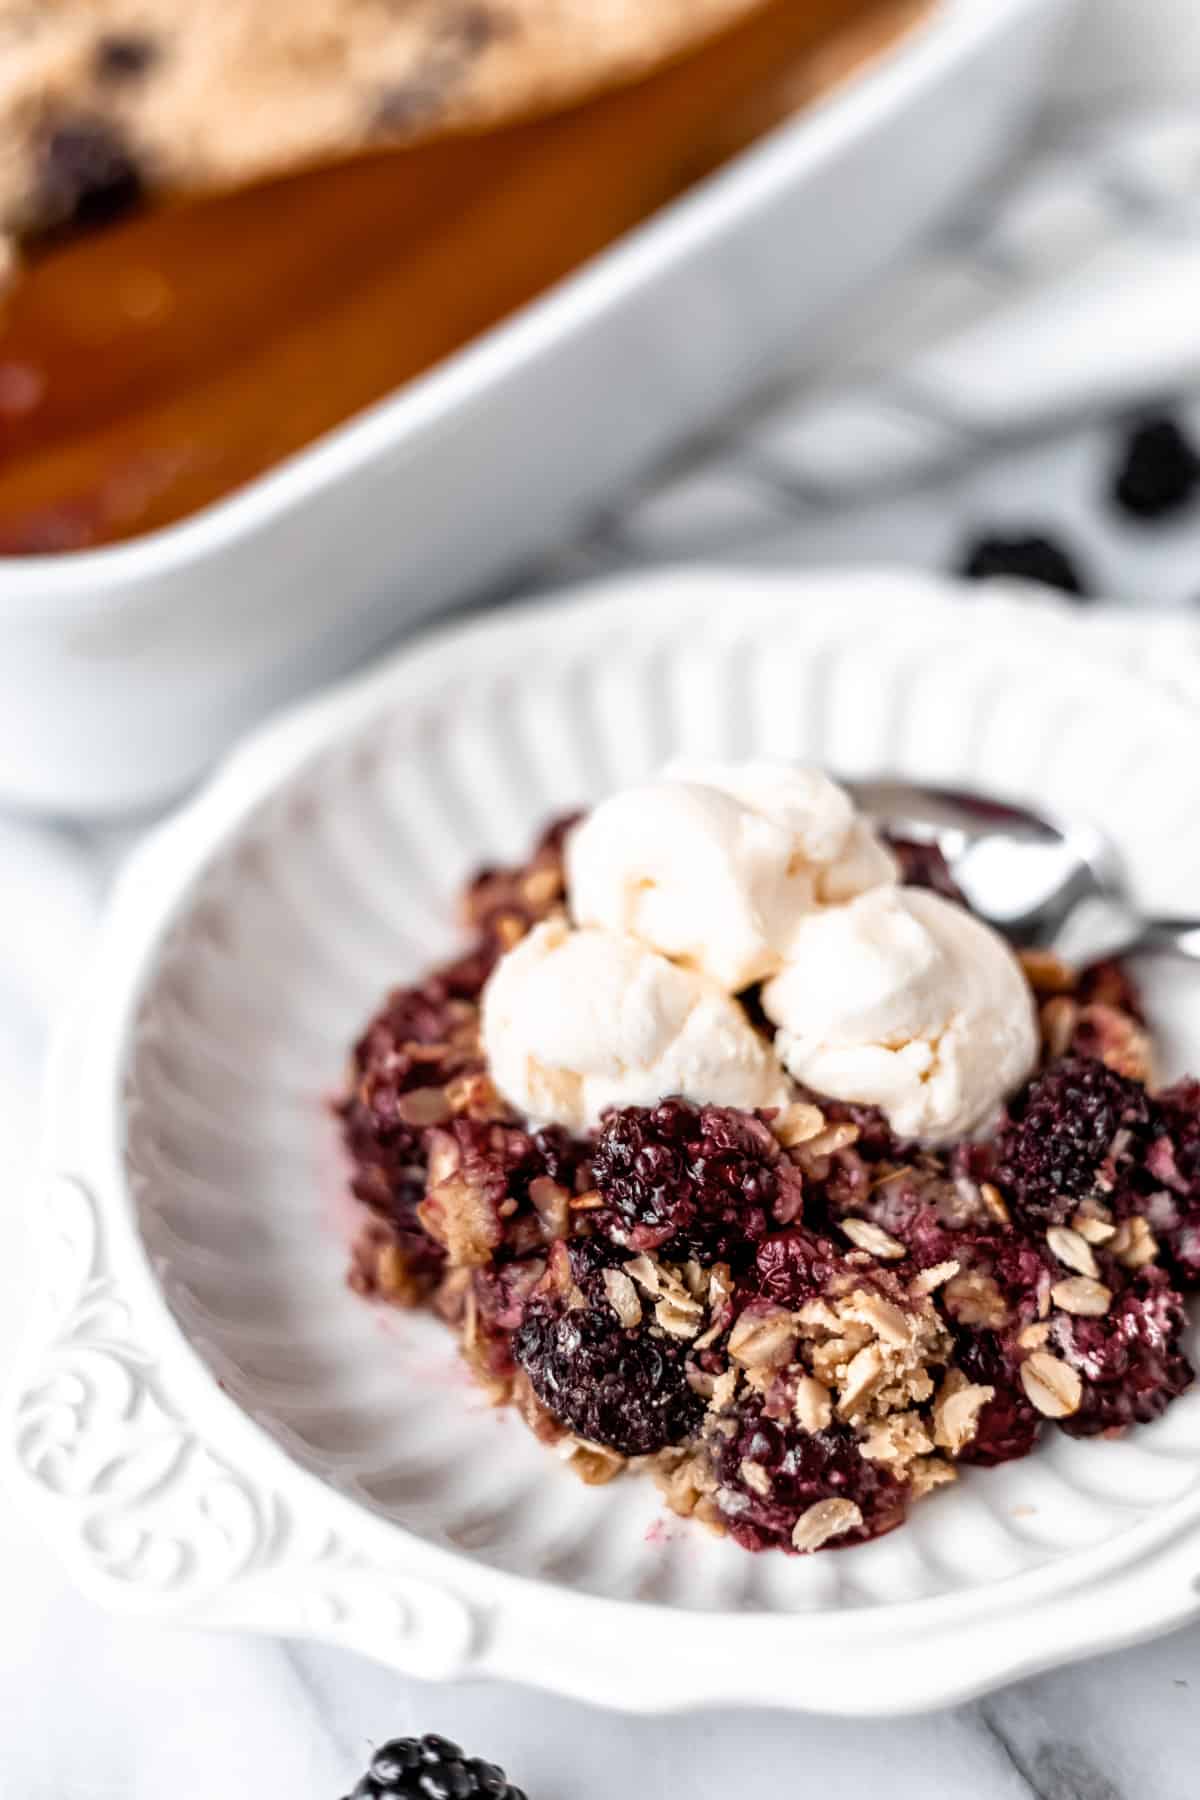 Blackberry crisp topped with vanilla ice cream in a white bowl with the baking dish partially showing in the background.